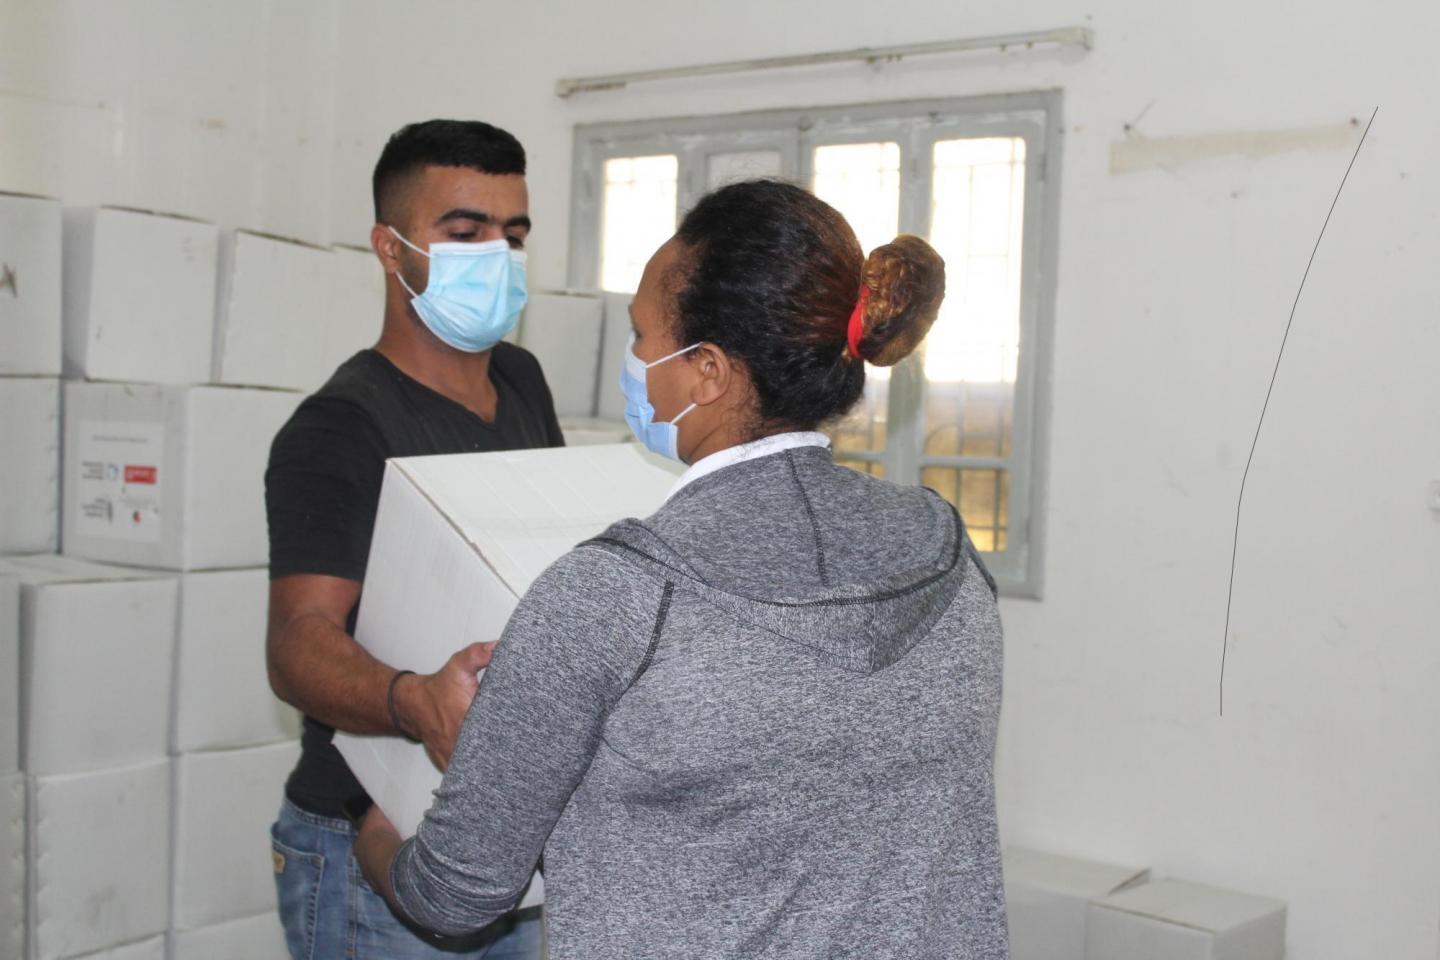 In November 2020, a staff person from The Popular Aid for Relief and Development (PARD), an MCC partner, hands a box of food to a woman who was impacted by the Beirut port explosion.